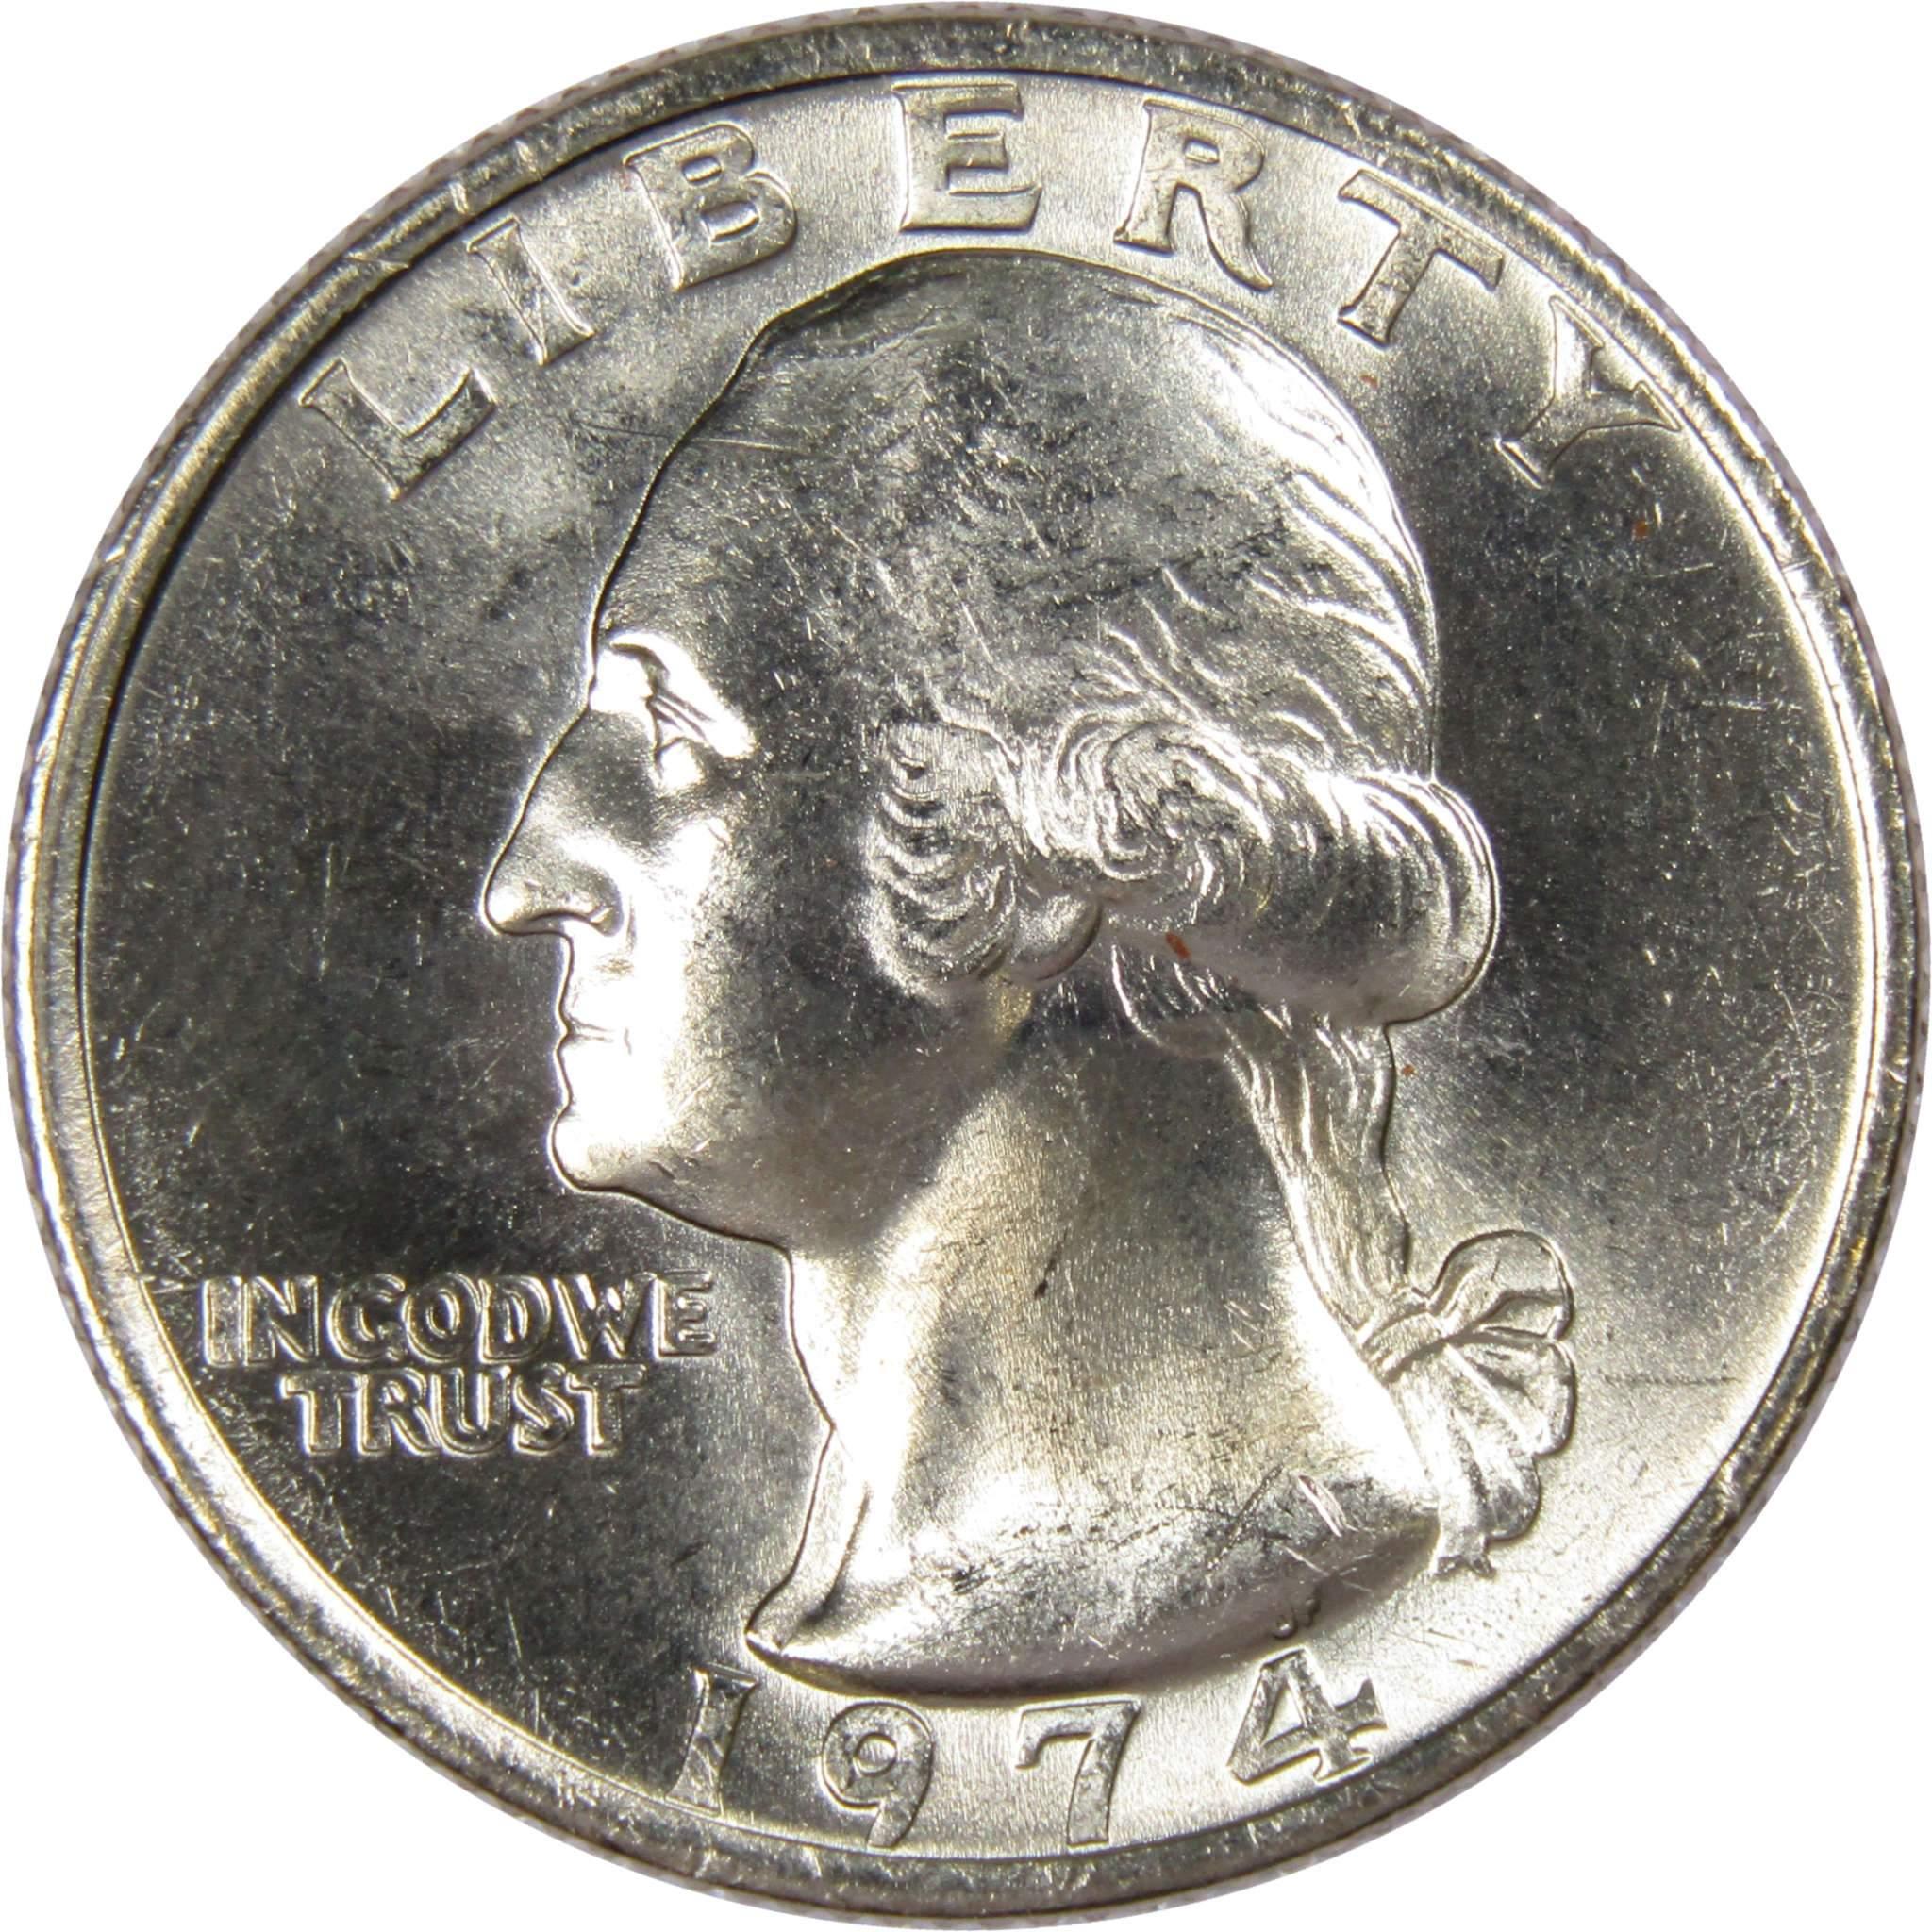 1974 Washington Quarter BU Uncirculated Mint State 25c US Coin Collectible